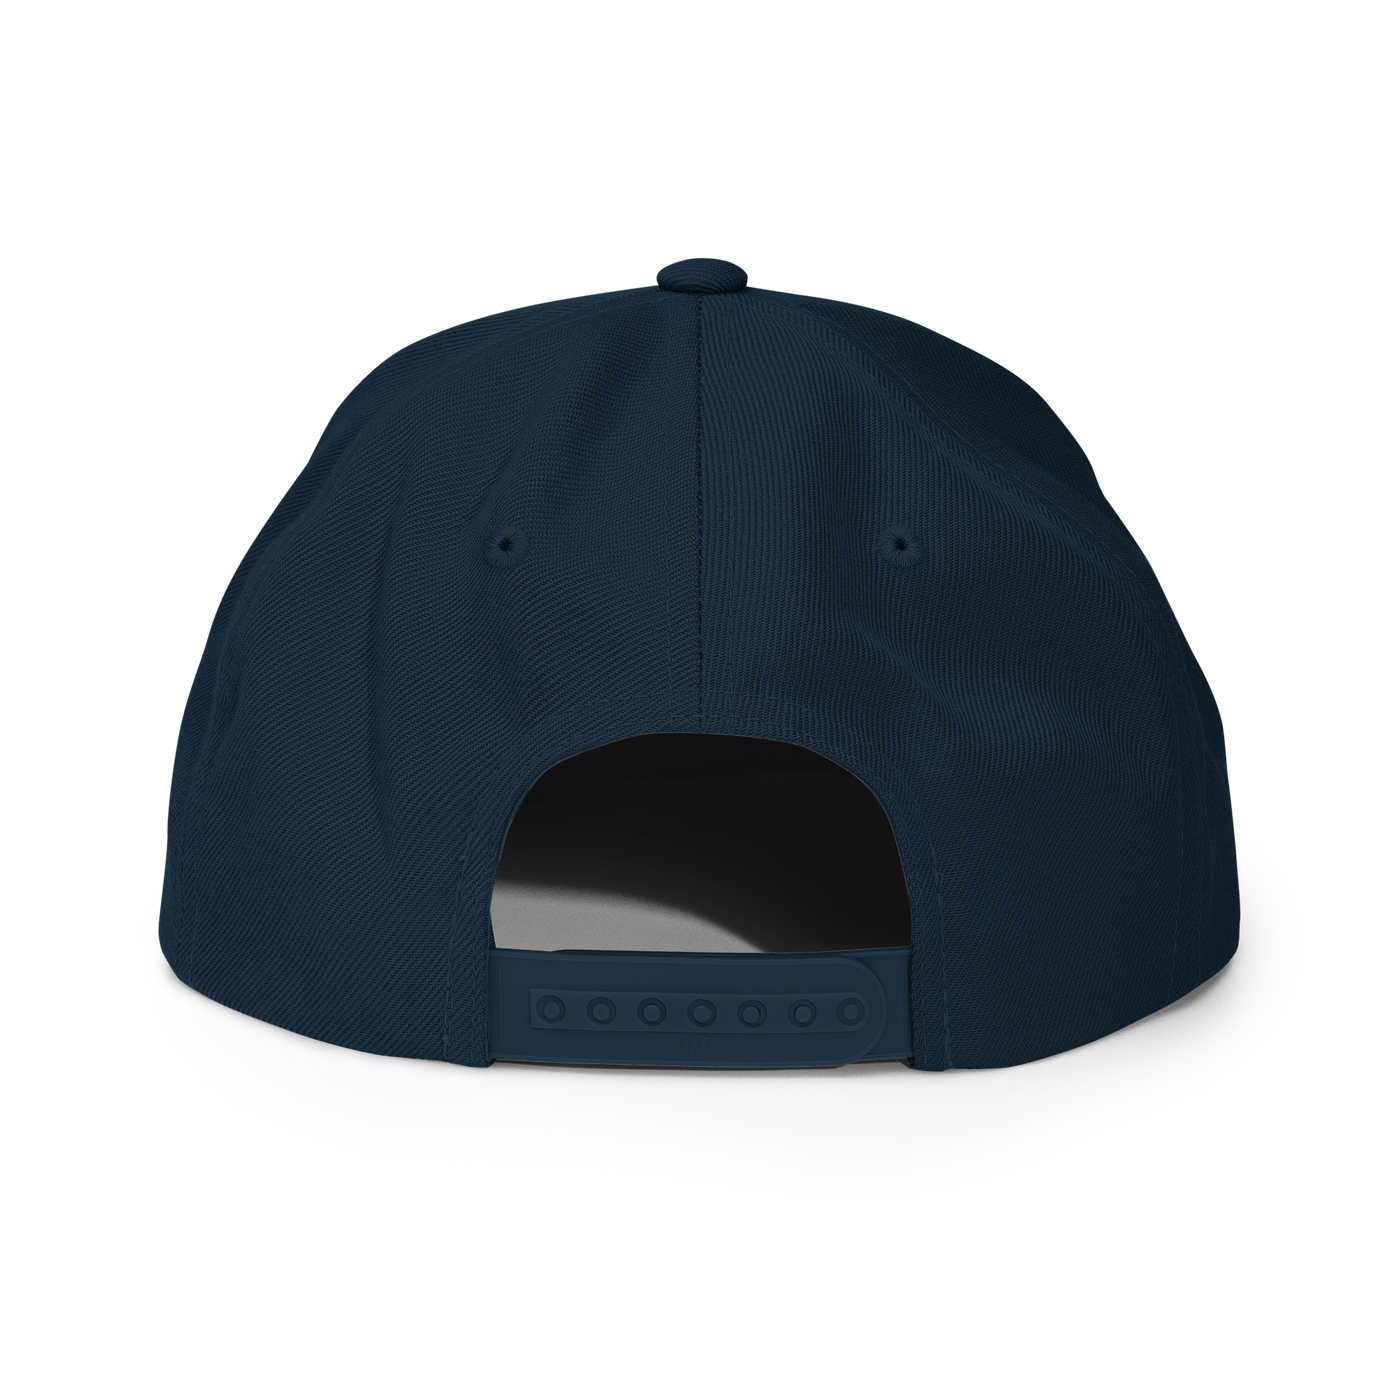 Fish & Chips Snapback Hat - Dark Navy - - Just Another Cap Store